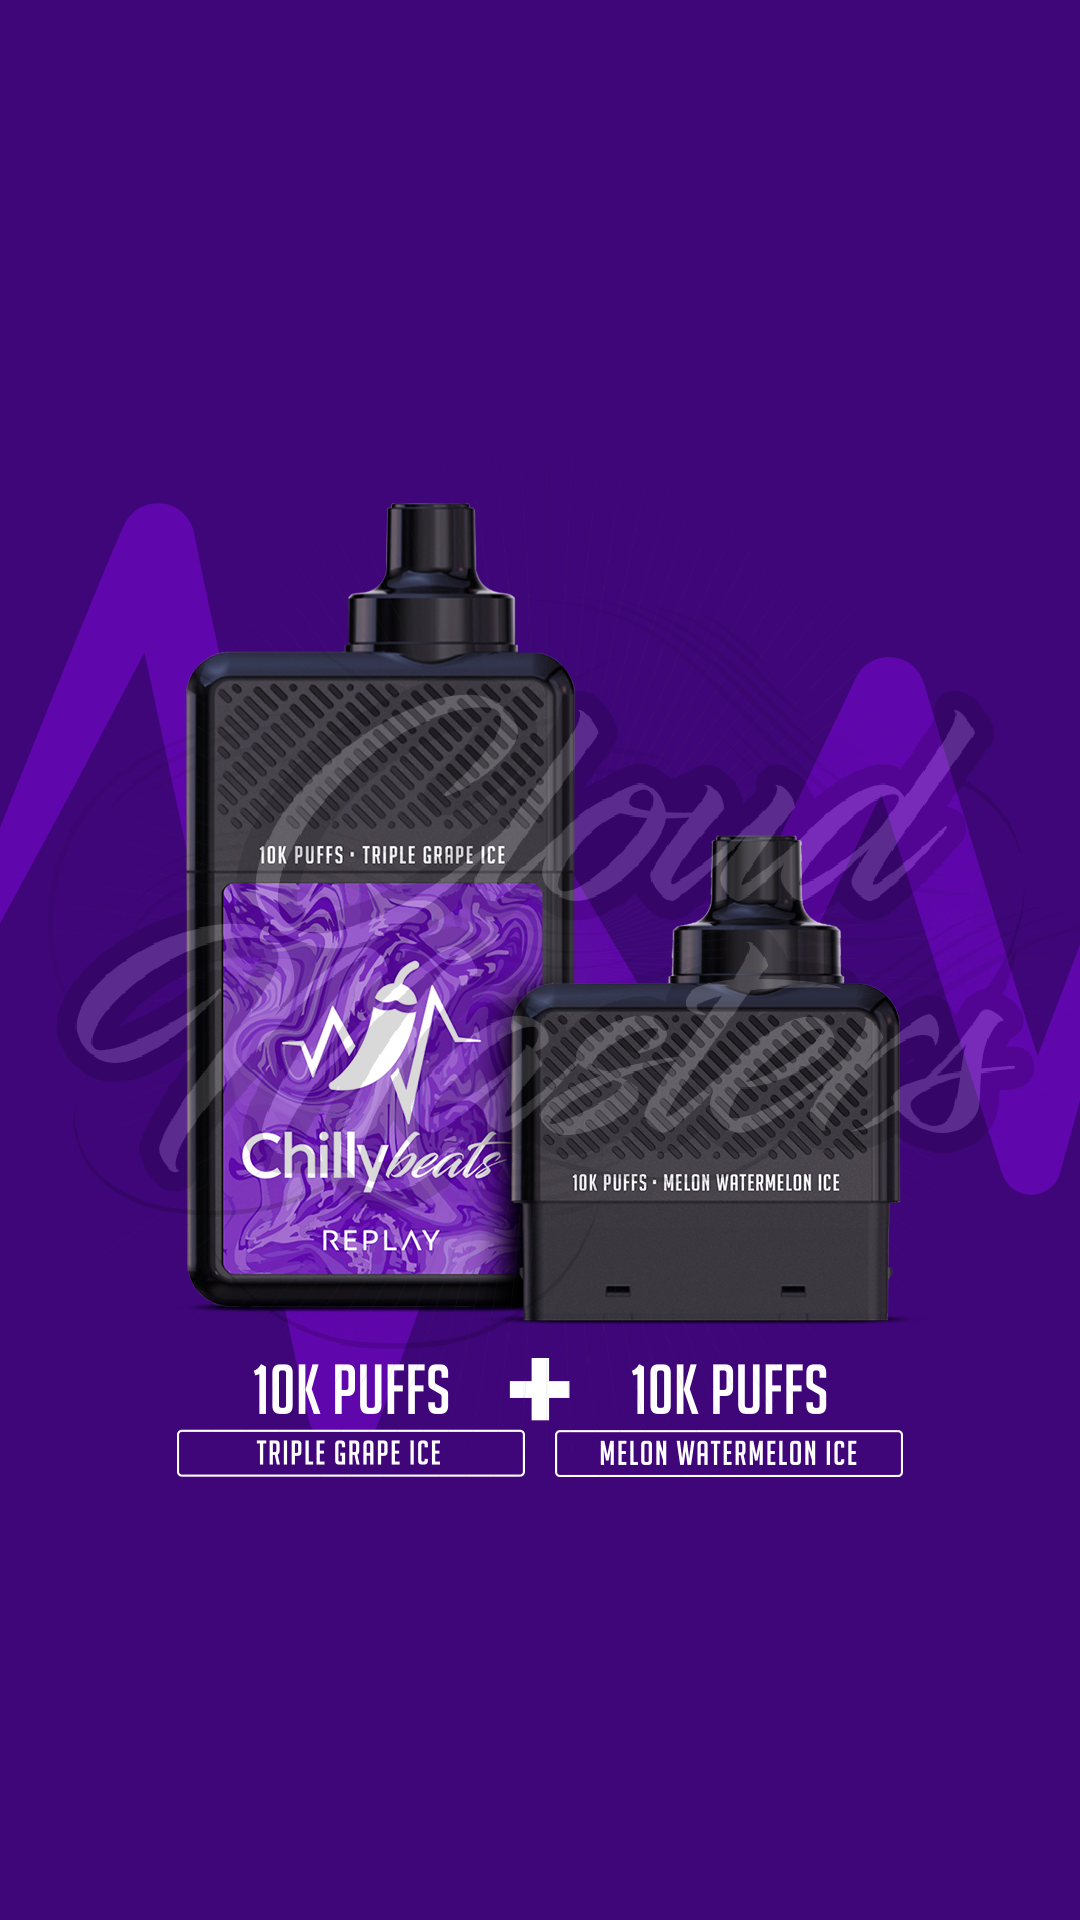 Chilly Beats Replay 20k puffs – Triple Grape Ice + Melon Watermelon Ice – Vertical